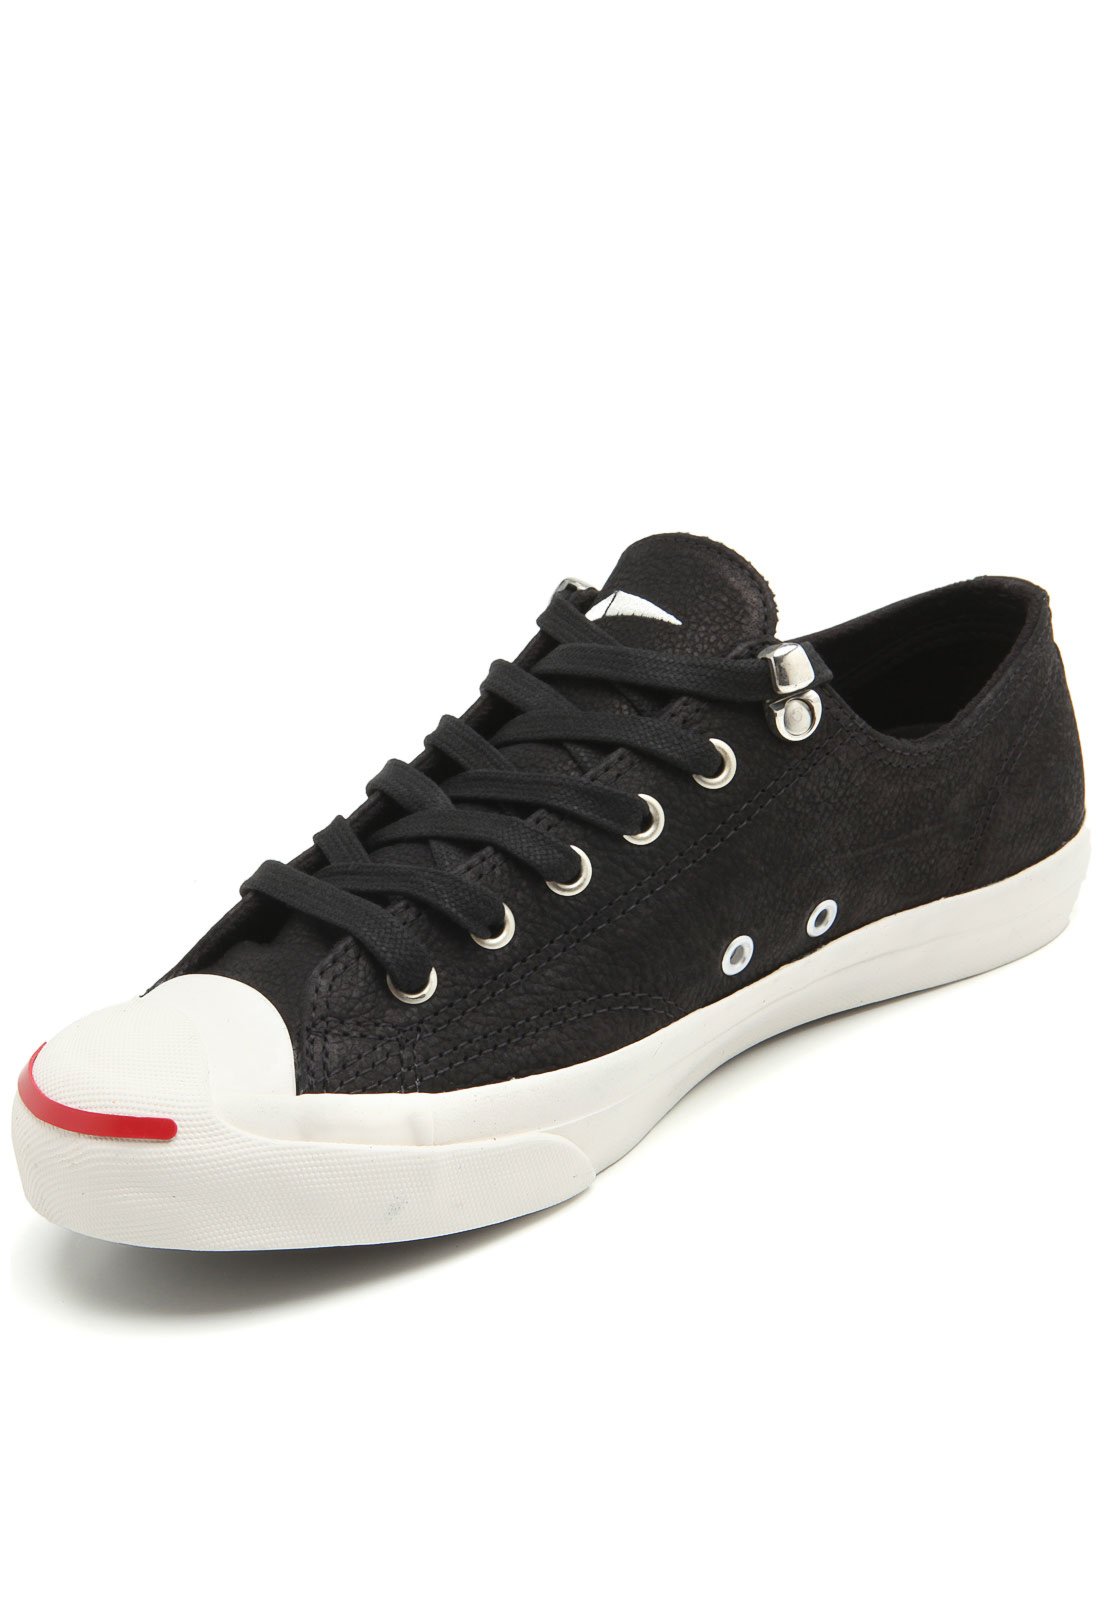 converse jack purcell zoom